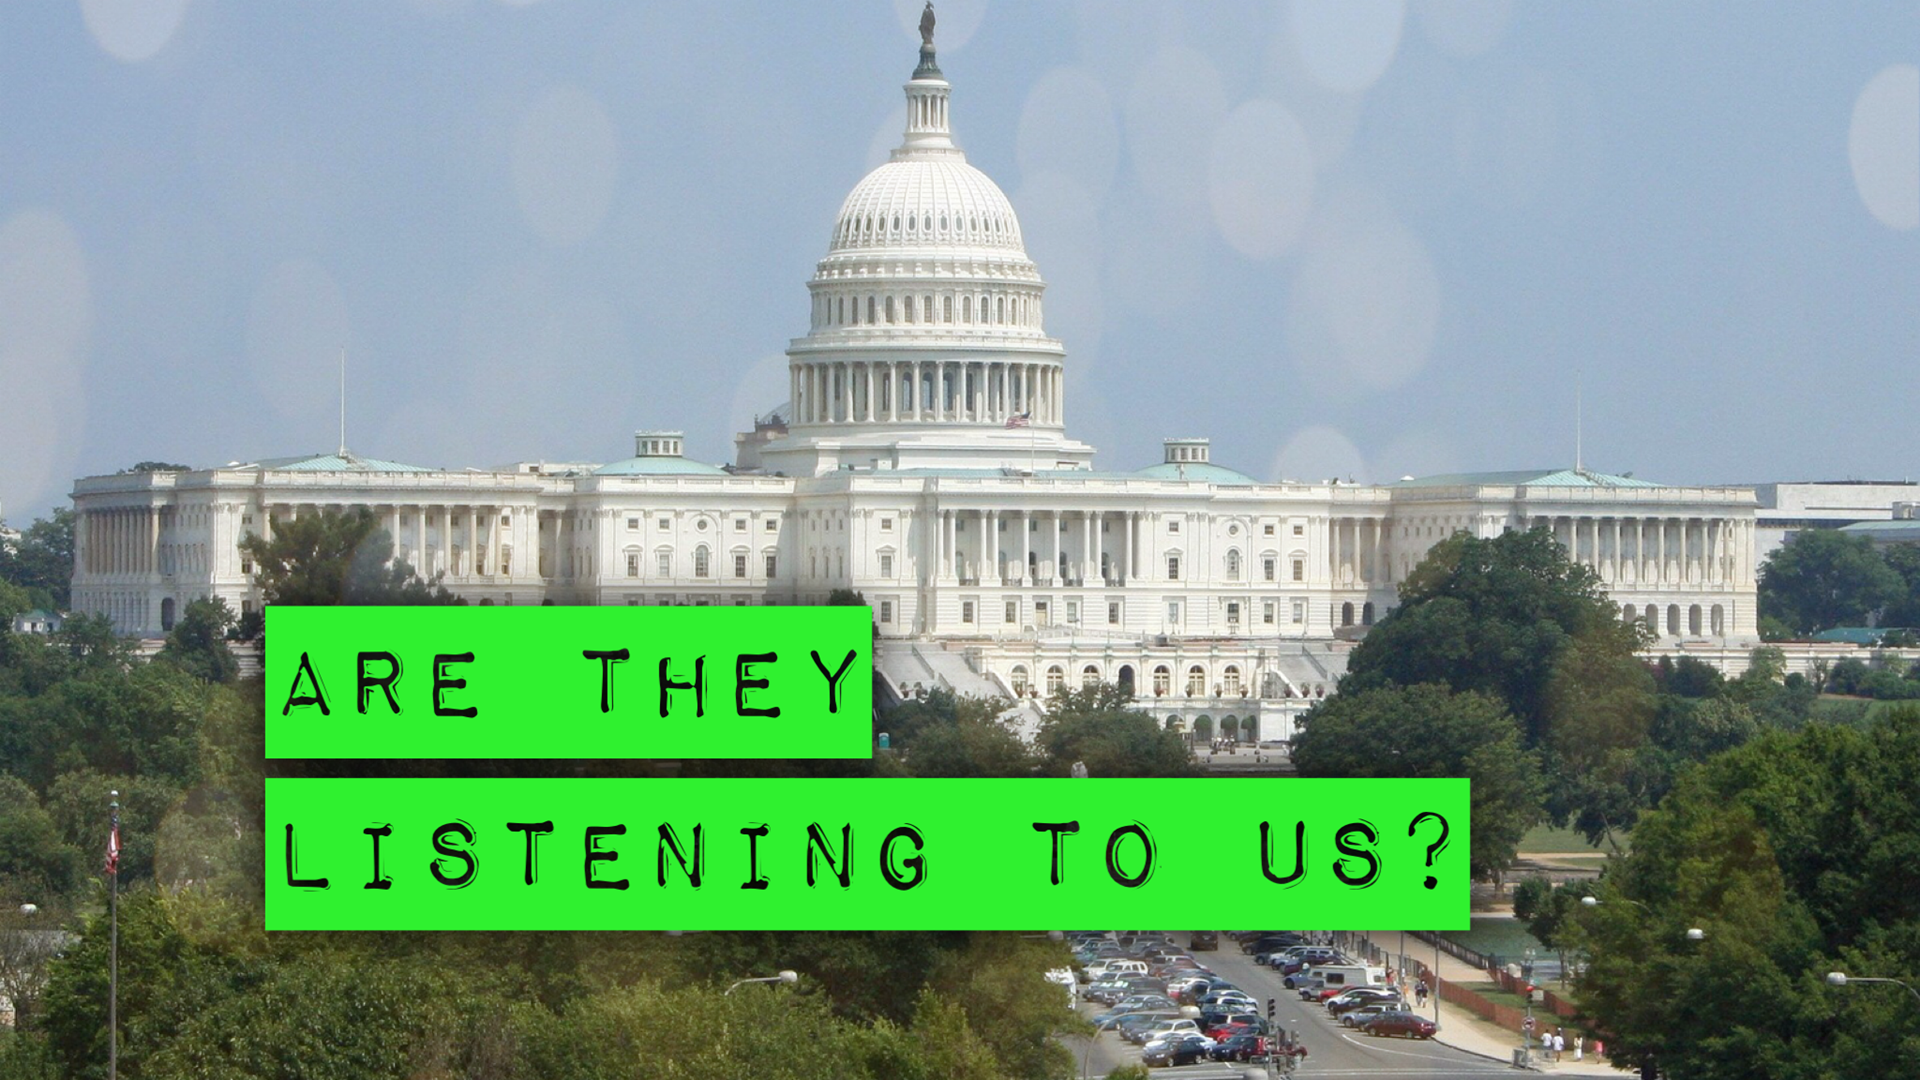 Americans are hyper-focused on national politics. And we have lots to say to our Senators and Congress members. But are they listening to us?